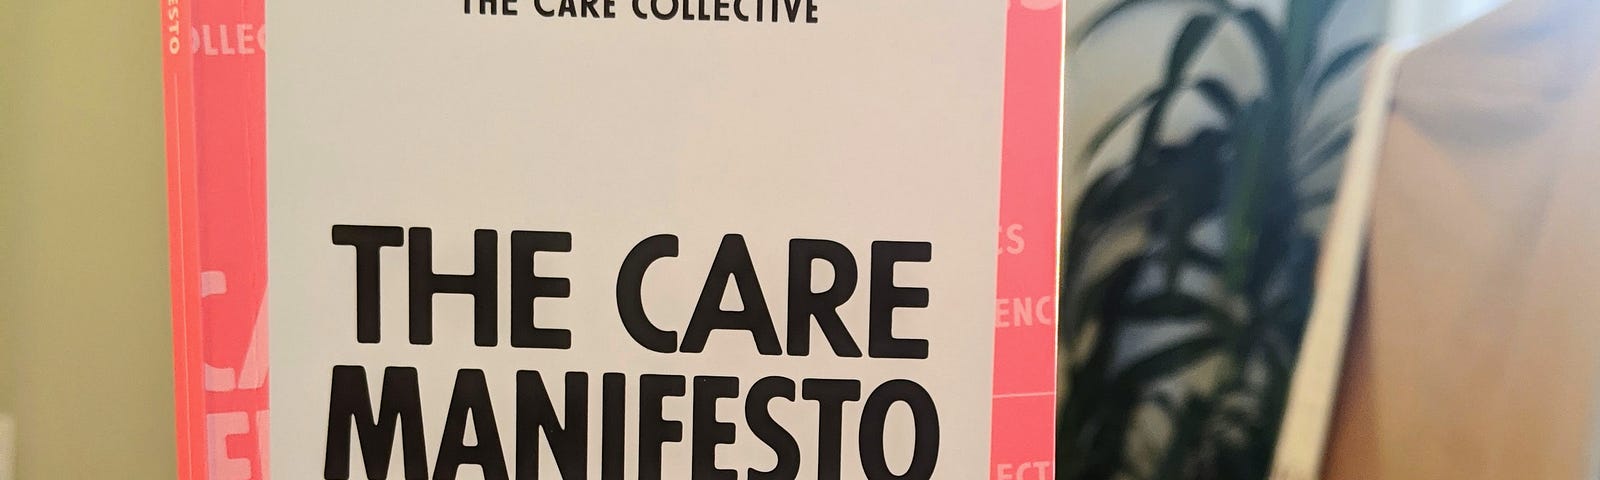 The Care Manifesto: The Politics of Interdependence by The Care Collective